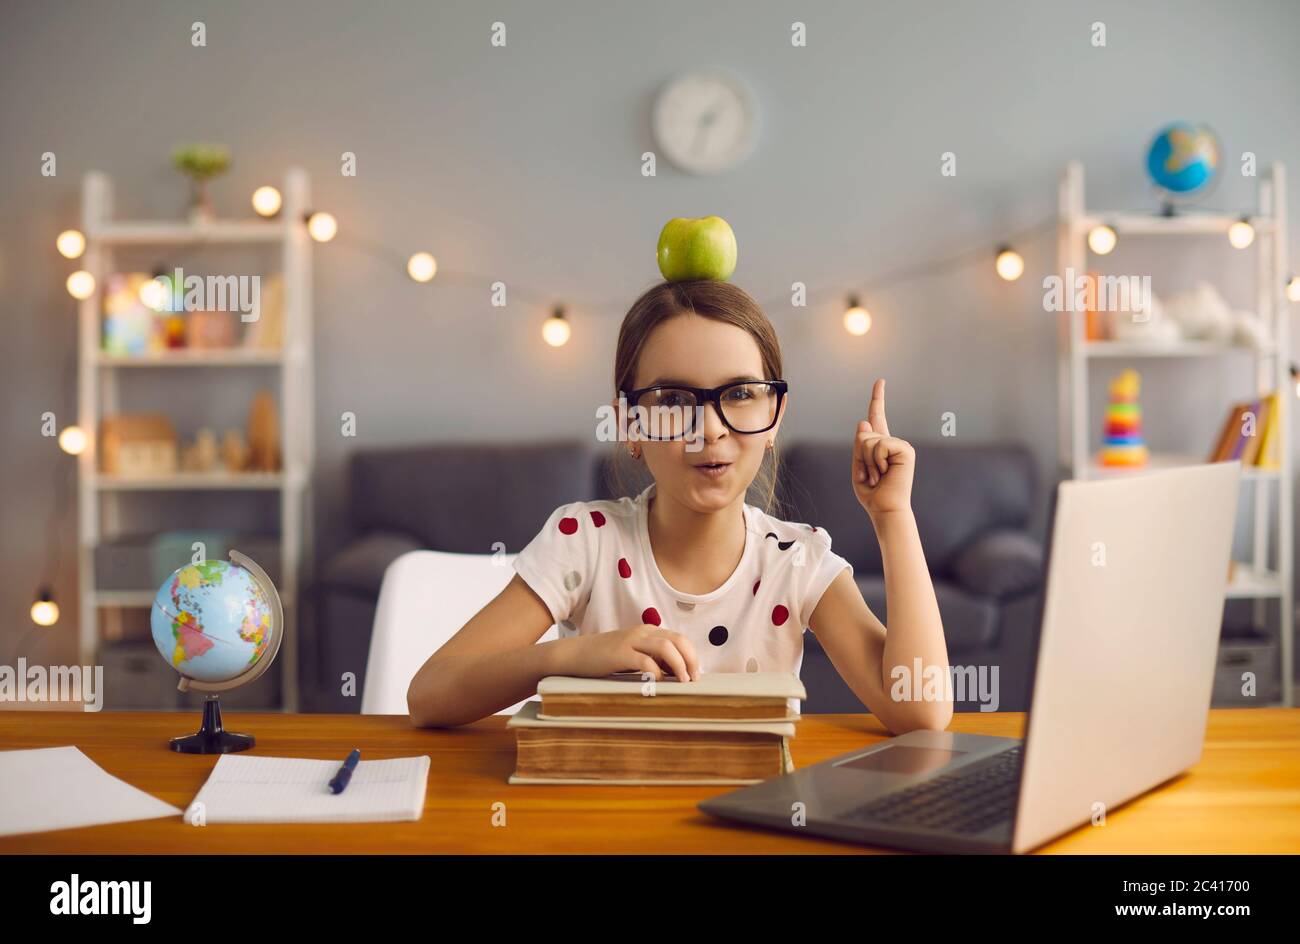 Adorable little girl with apple on her head and heap of books pointing up in front of laptop computer at home Stock Photo